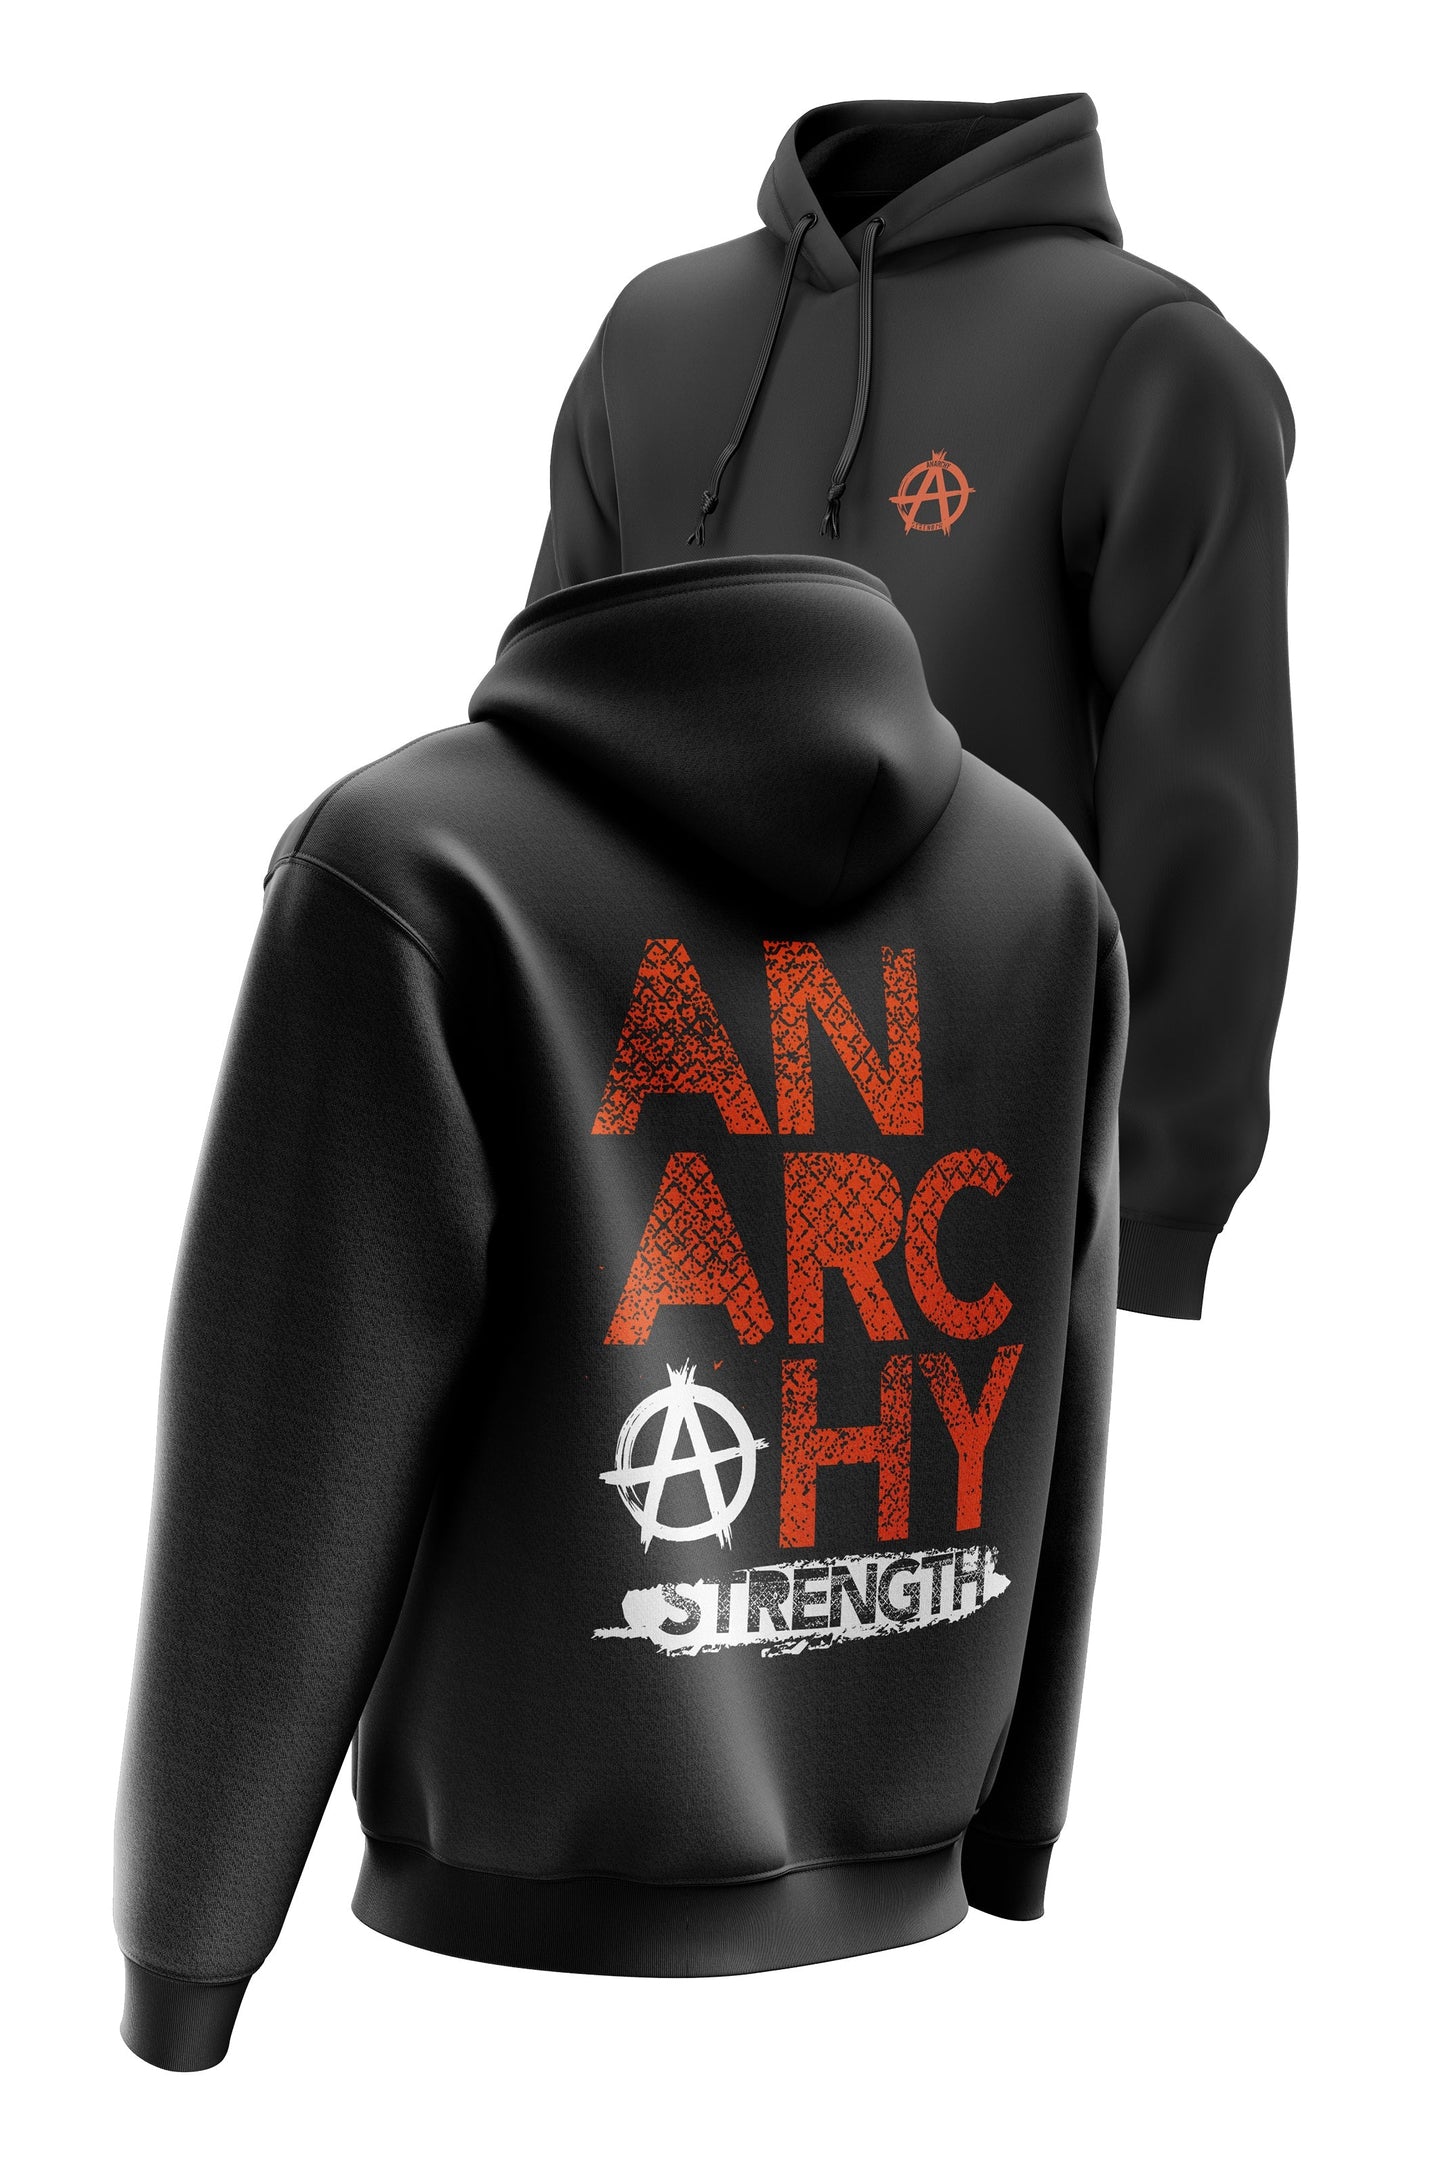 AS 'AGAINST THE FENCE' HOODIE + TEE COMBO - BLACK